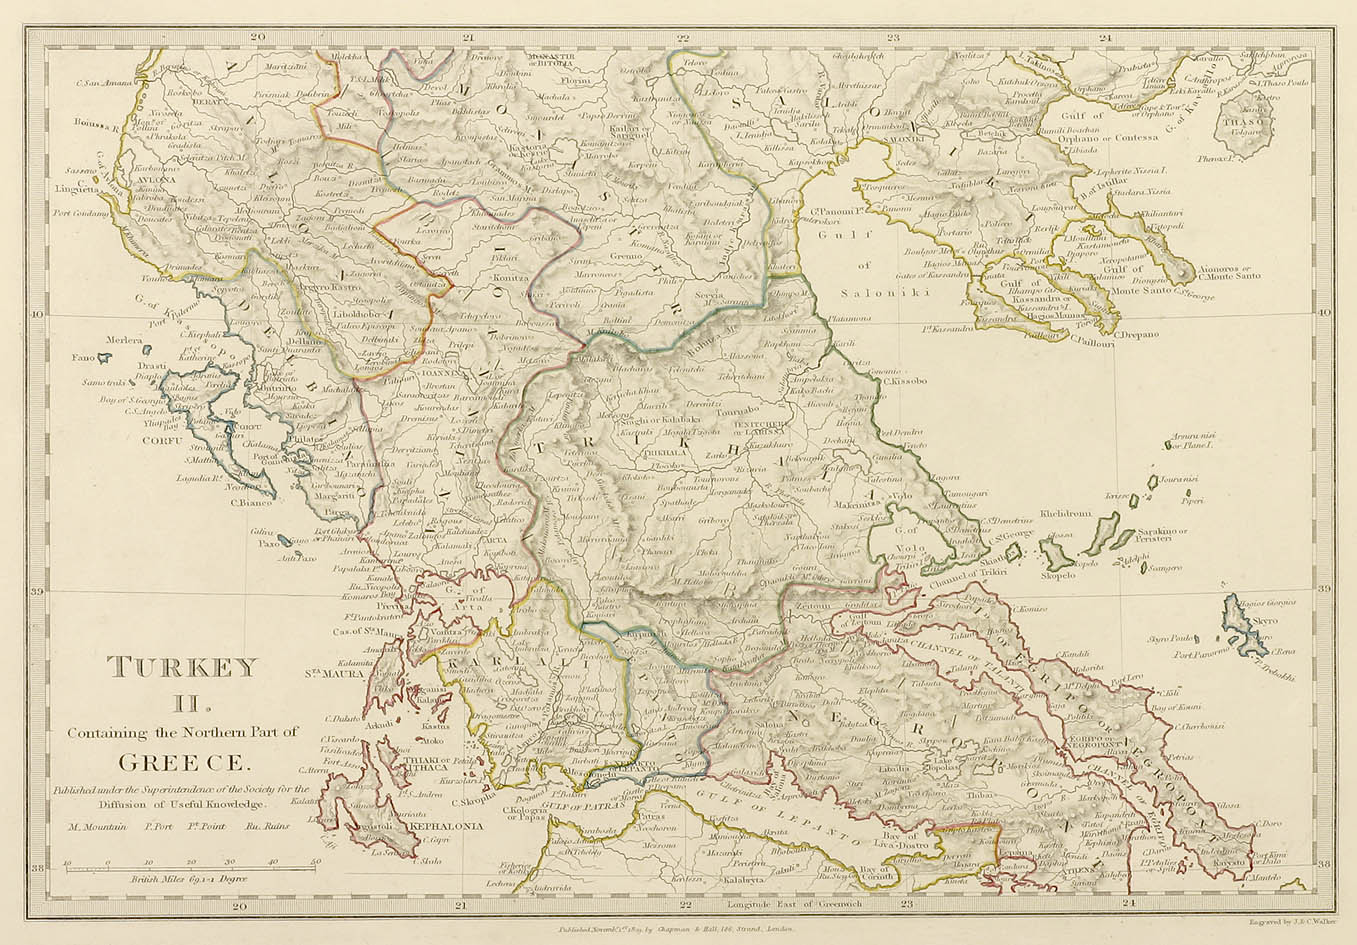 Turkey II. Containing the Northern Part of Greece. - Antique Map from 1829